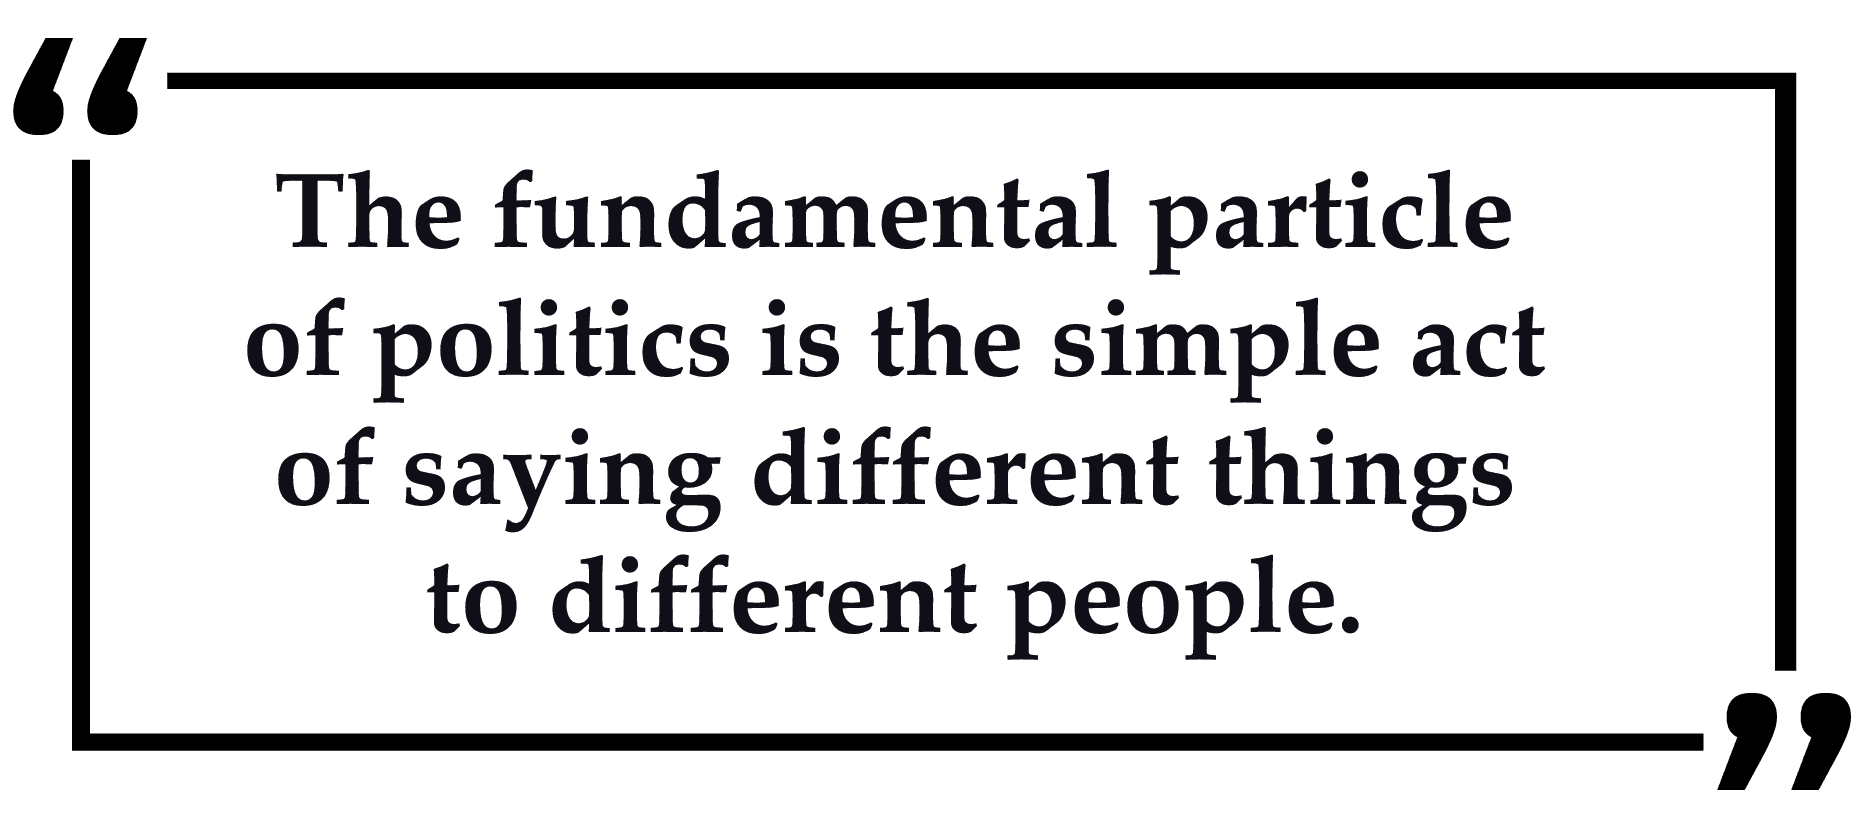 Politics is saying different things to different people James Currier